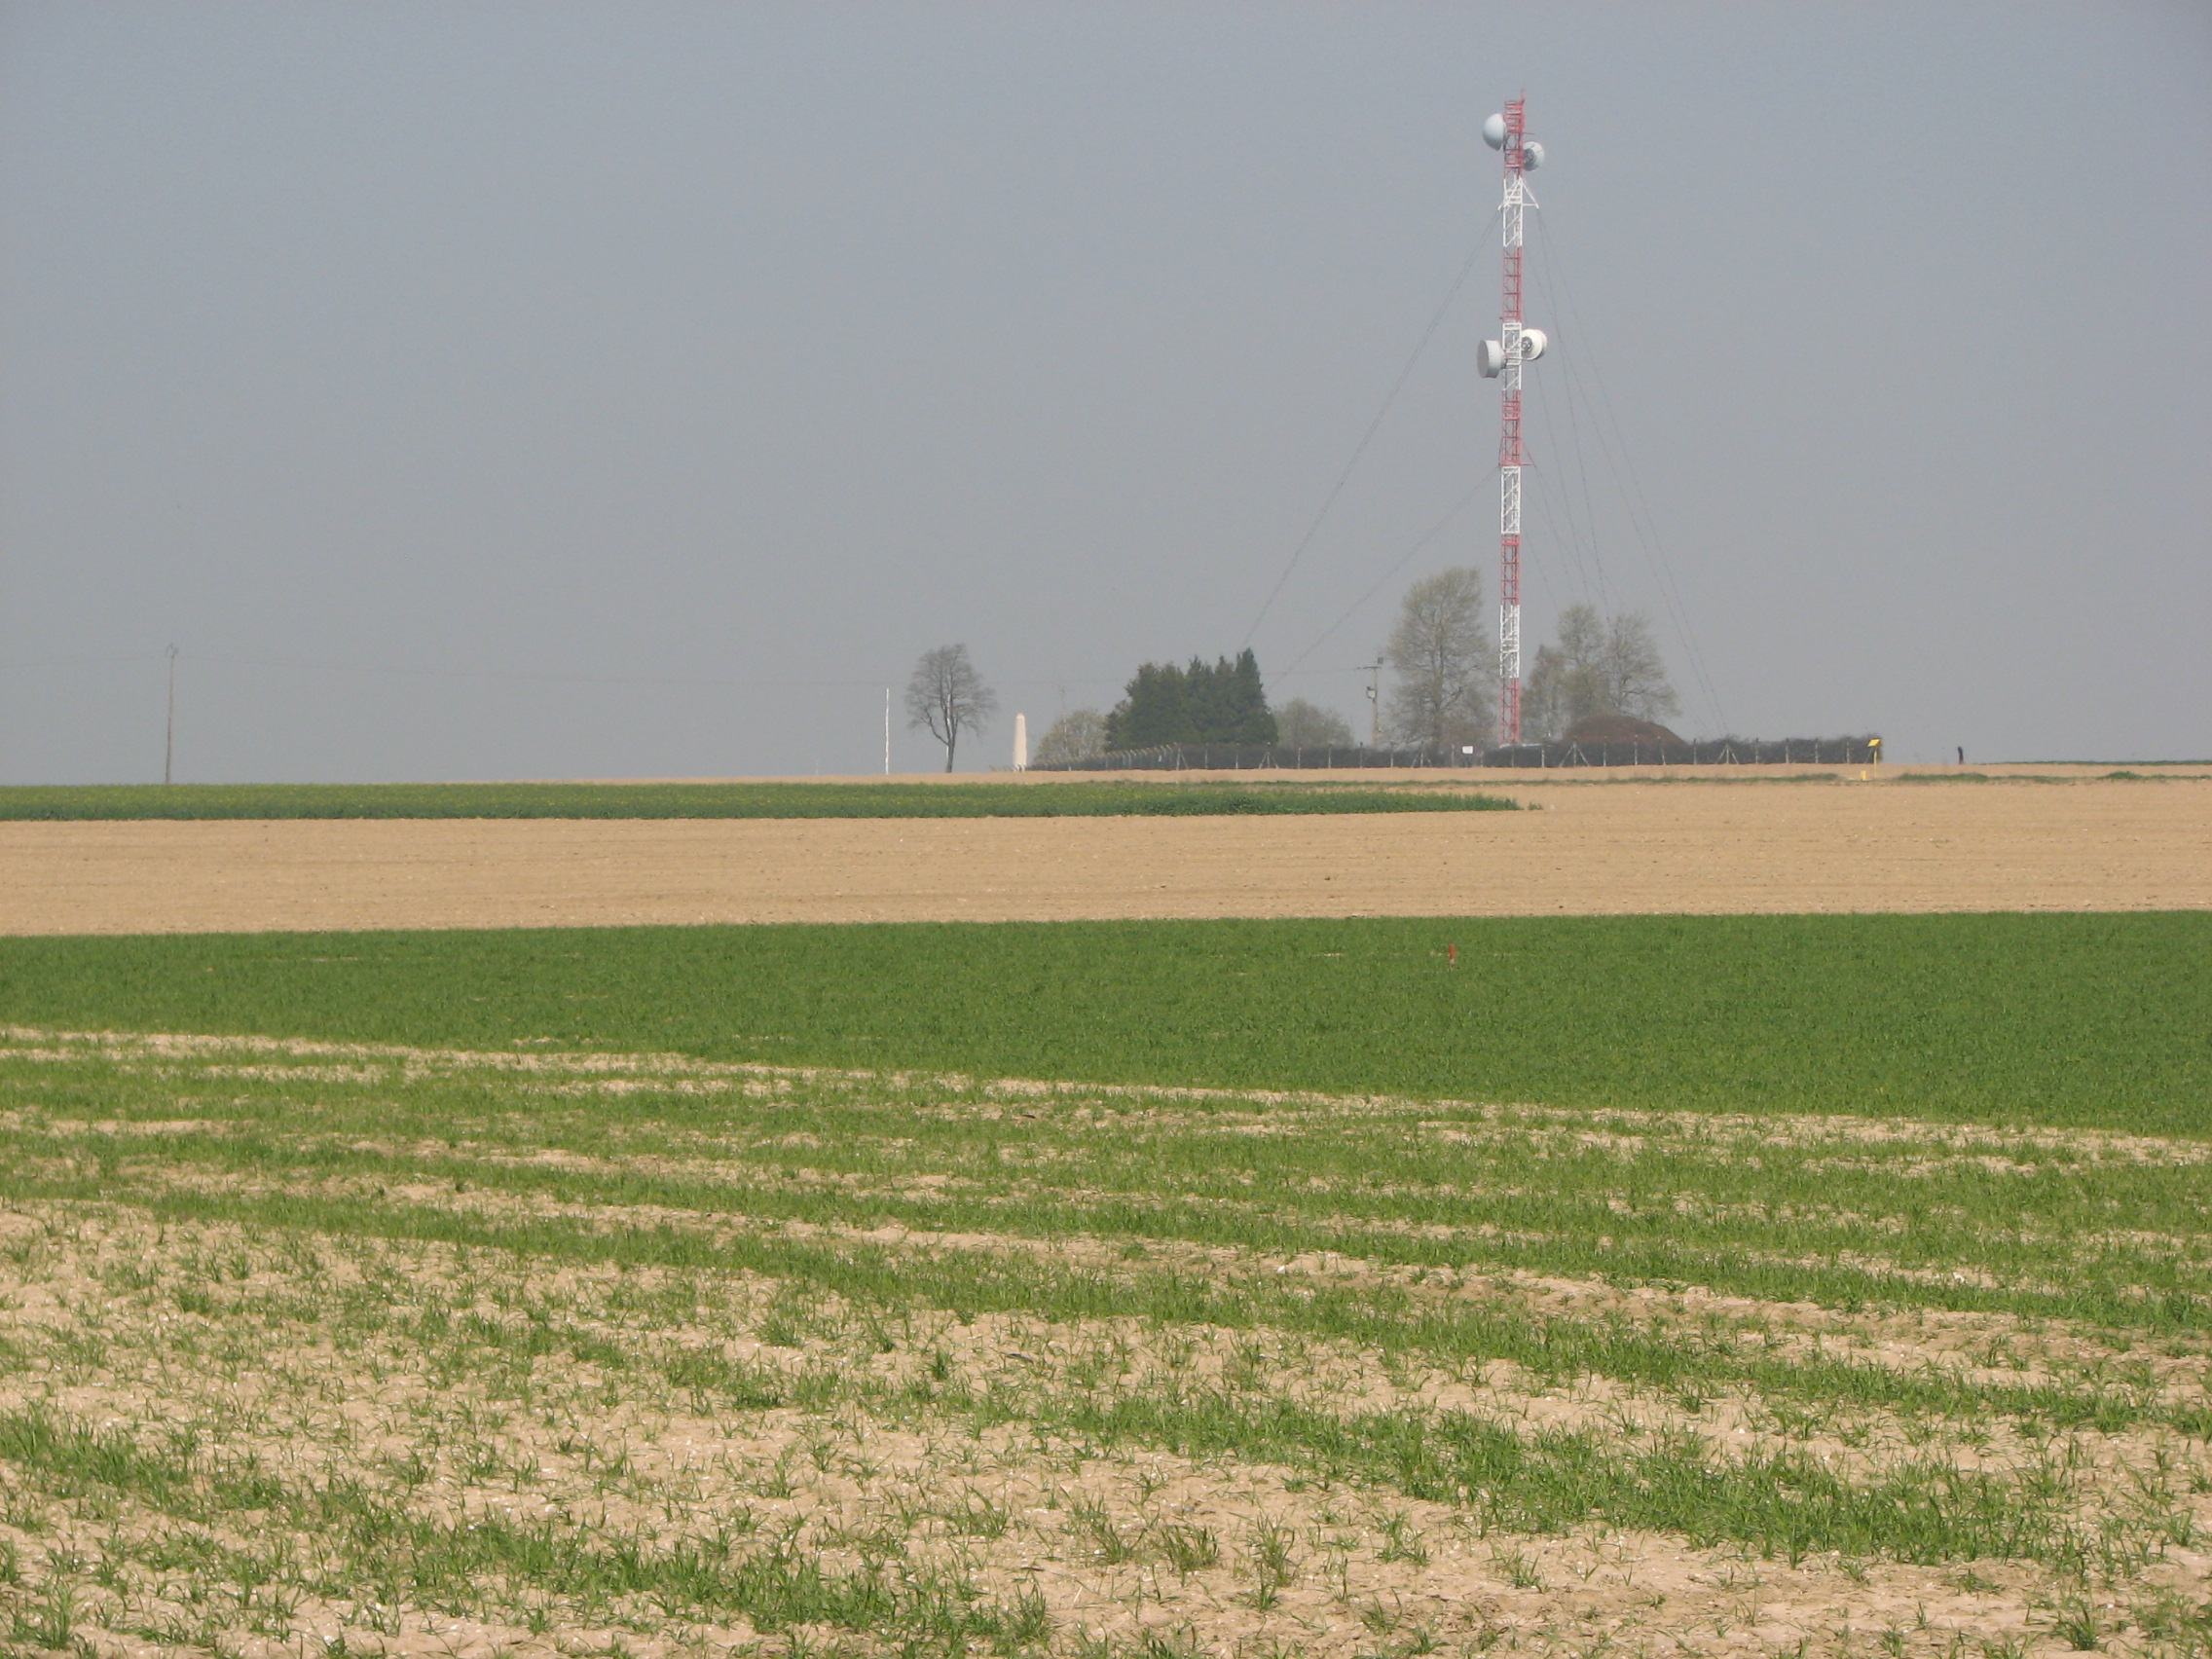 The spot where Michael was killed, near Pozieres - Photographed in April 2010<br>Looking towards the site of the junction of the O.G.2 and Munster Alley trenches, where Michael was killed.
 
(O.G.2. trench ran from just to the left of the mast (which stands in front of the site of Pozieres Mill) and came towards the camera.   Munster Alley trench ran off to the right roughly along where the line of thick corn in the lower half of the photo changes to bare earth.  <br />MA